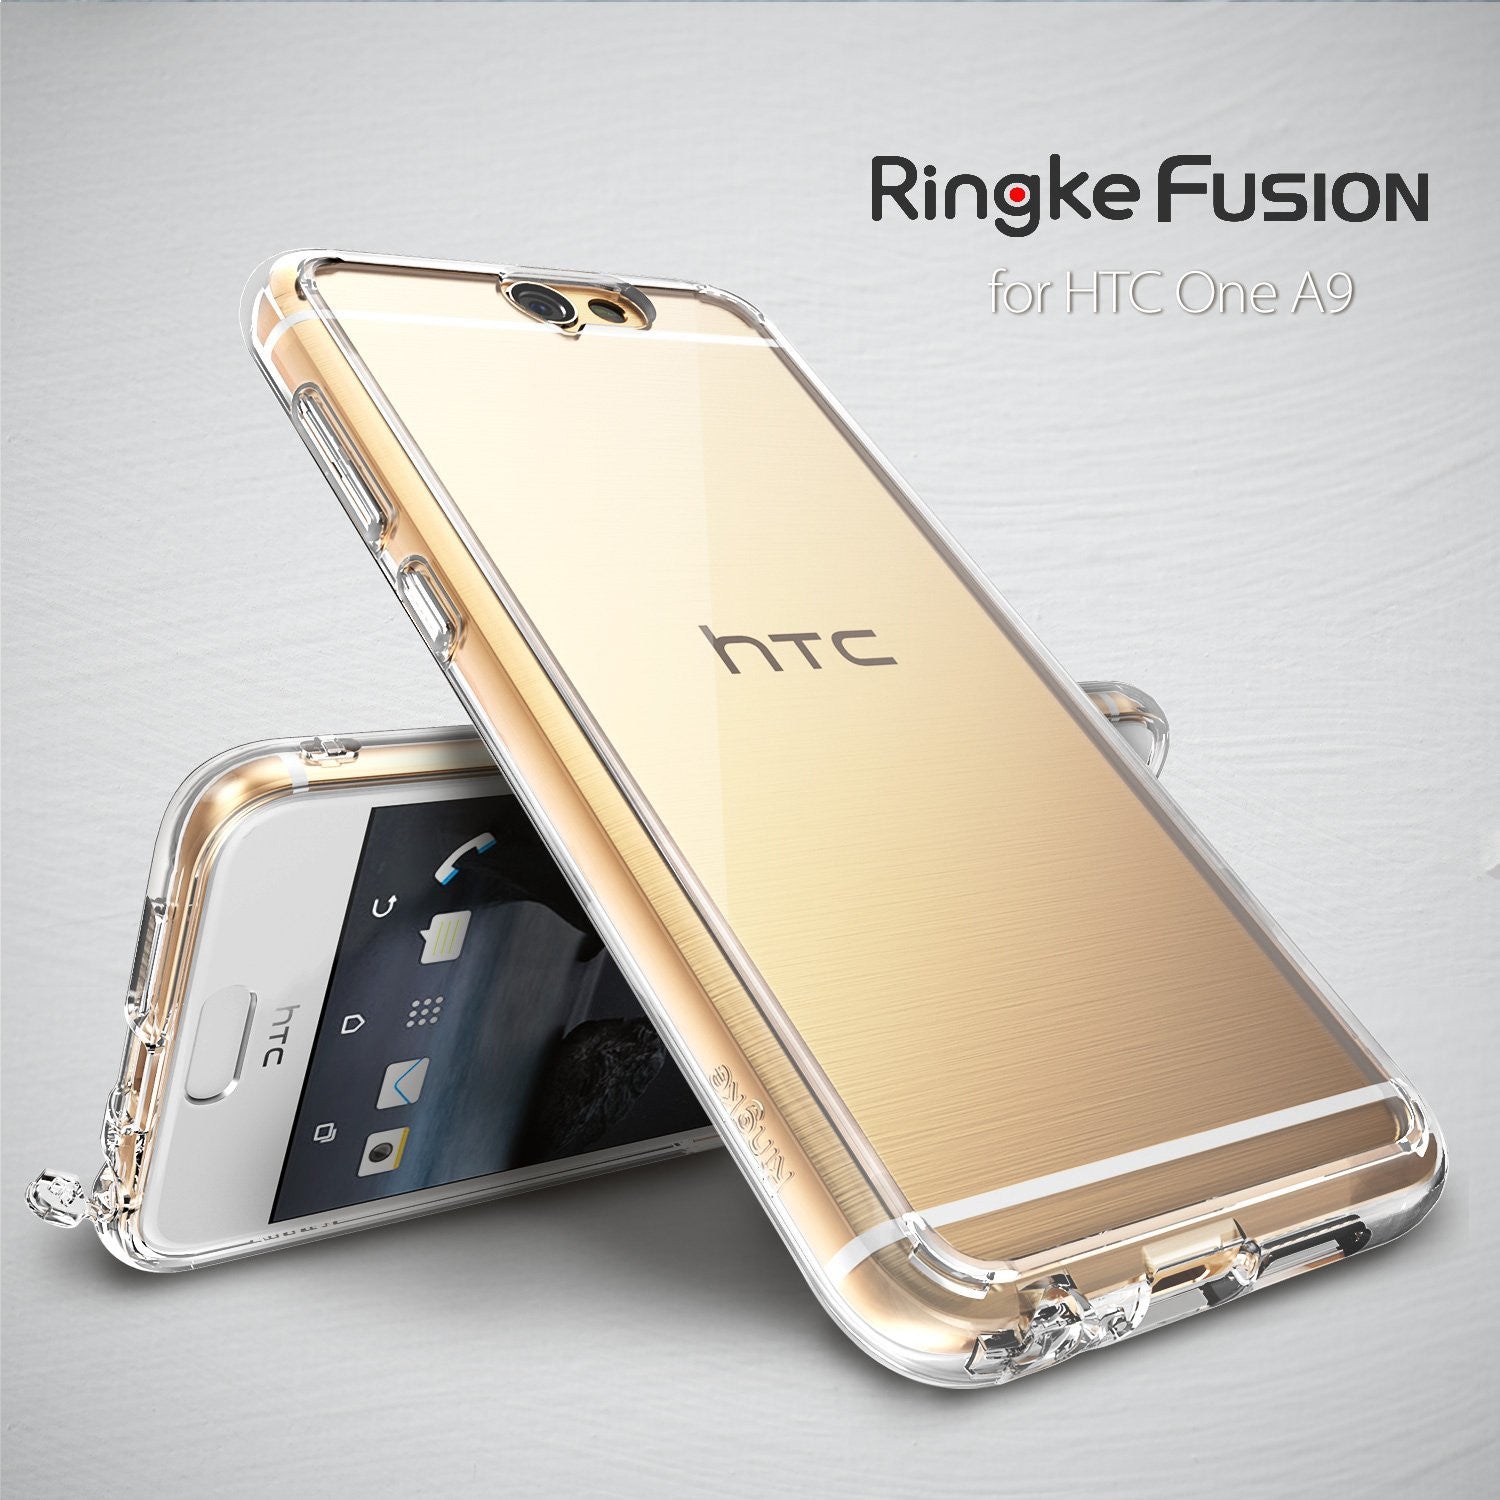 htc one a9 fusion